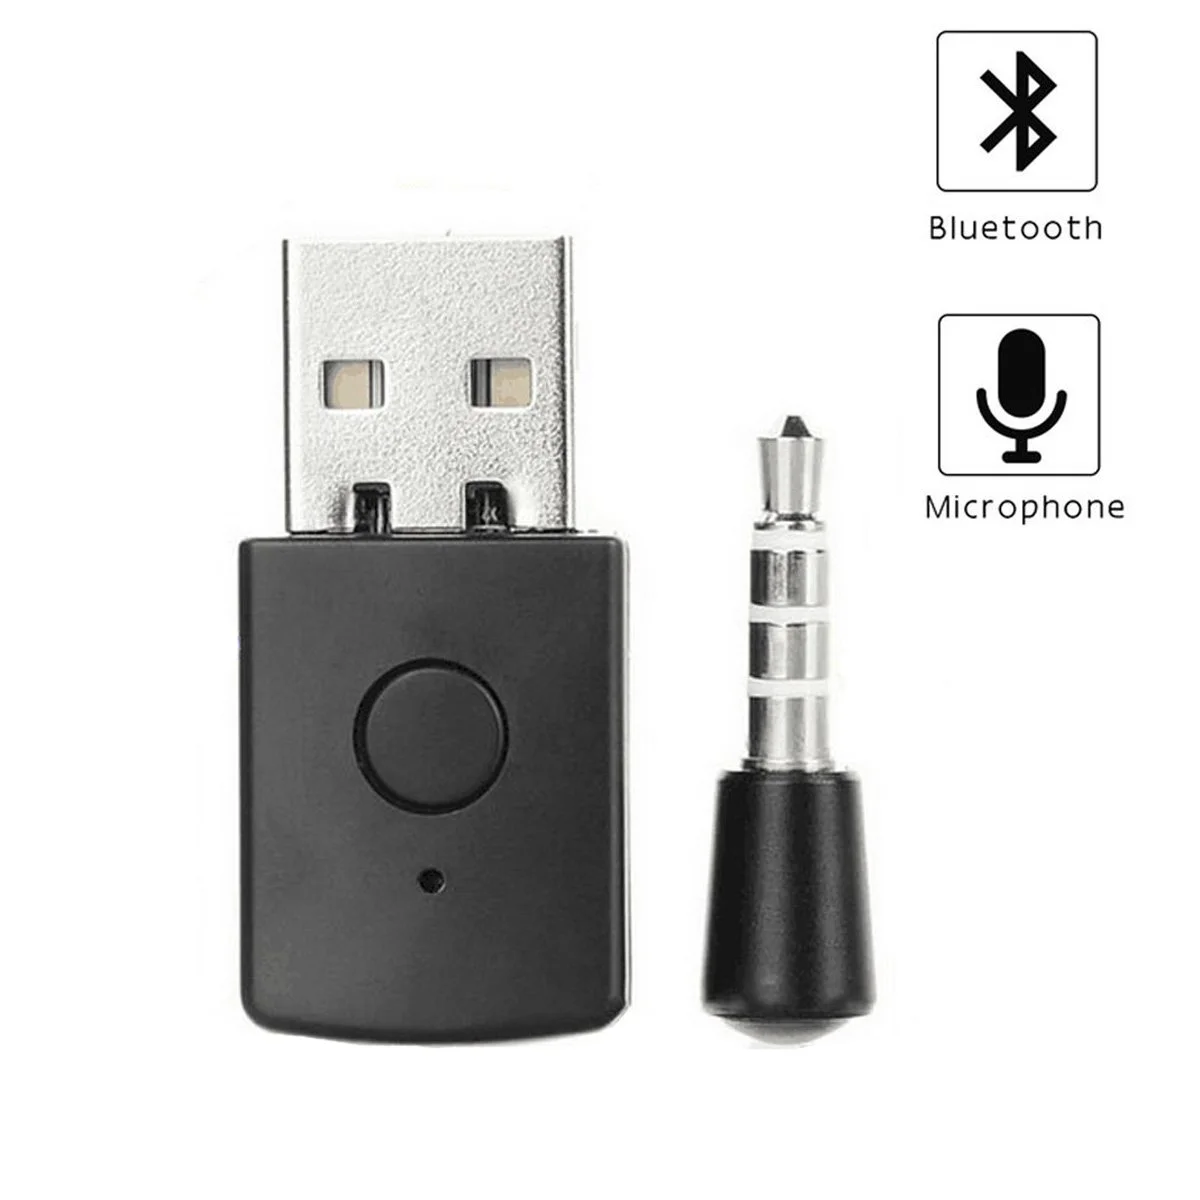 Bloedbad ondergronds Vorming Honcam Bluetooth Dongle Latest Version Usb Adapter Wireless Receiver For Ps4  Headset - Buy Ps4 Usb Bluetooth Adapter,Bluetooth Adapter For Ps4,Ps4  Bluetooth Usb Dongle Product on Alibaba.com